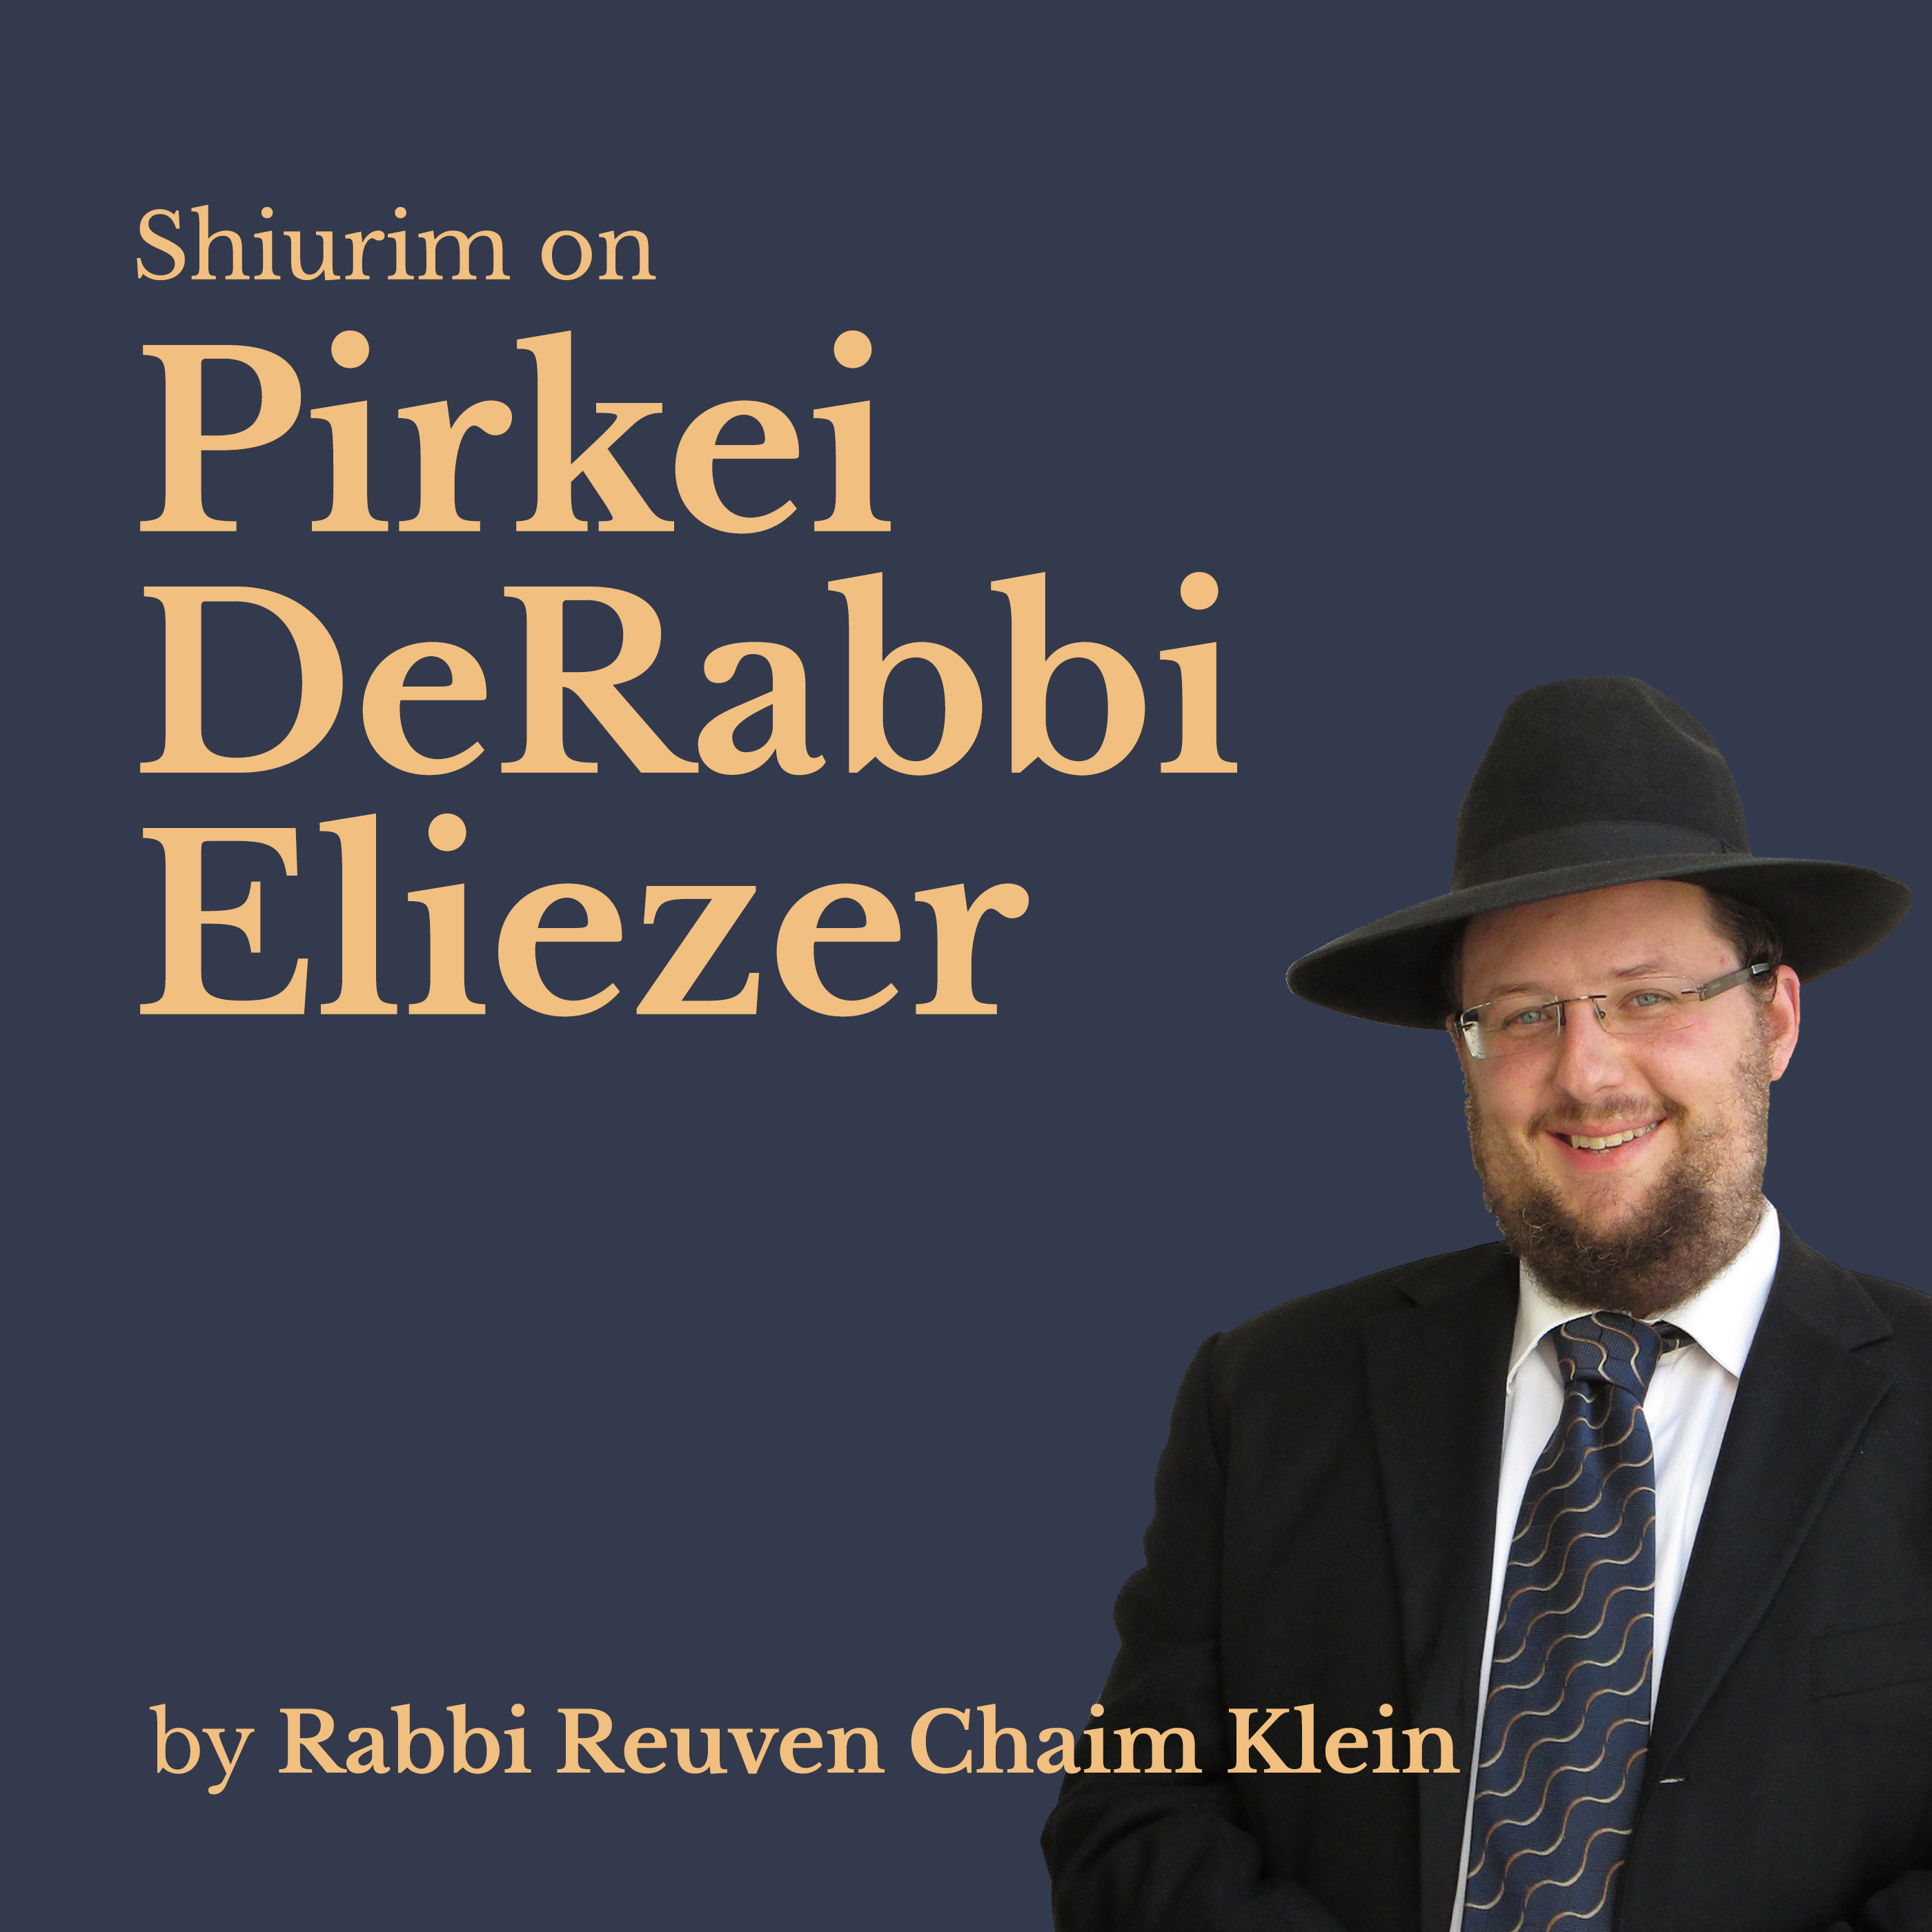 Pirkei DeRabbi Eliezer Podcast EPISODE 108: CHAPTER 51B - THE FUTURE MESSIANIC ERA Will the Third Beis HaMikdash come down from Heaven already built or will man need to build it? / A special gate in the Temple only opens on Shabbat & Rosh Chodesh / Kiddush on Shabbos & Rosh Chodesh / A special gate for Hashem that is supposed to remain closed / Only the righteous will be renewed / Ezekiel sees a river flowing from the future Temple in Jerusalem / Sweeting the Salt Water Seas